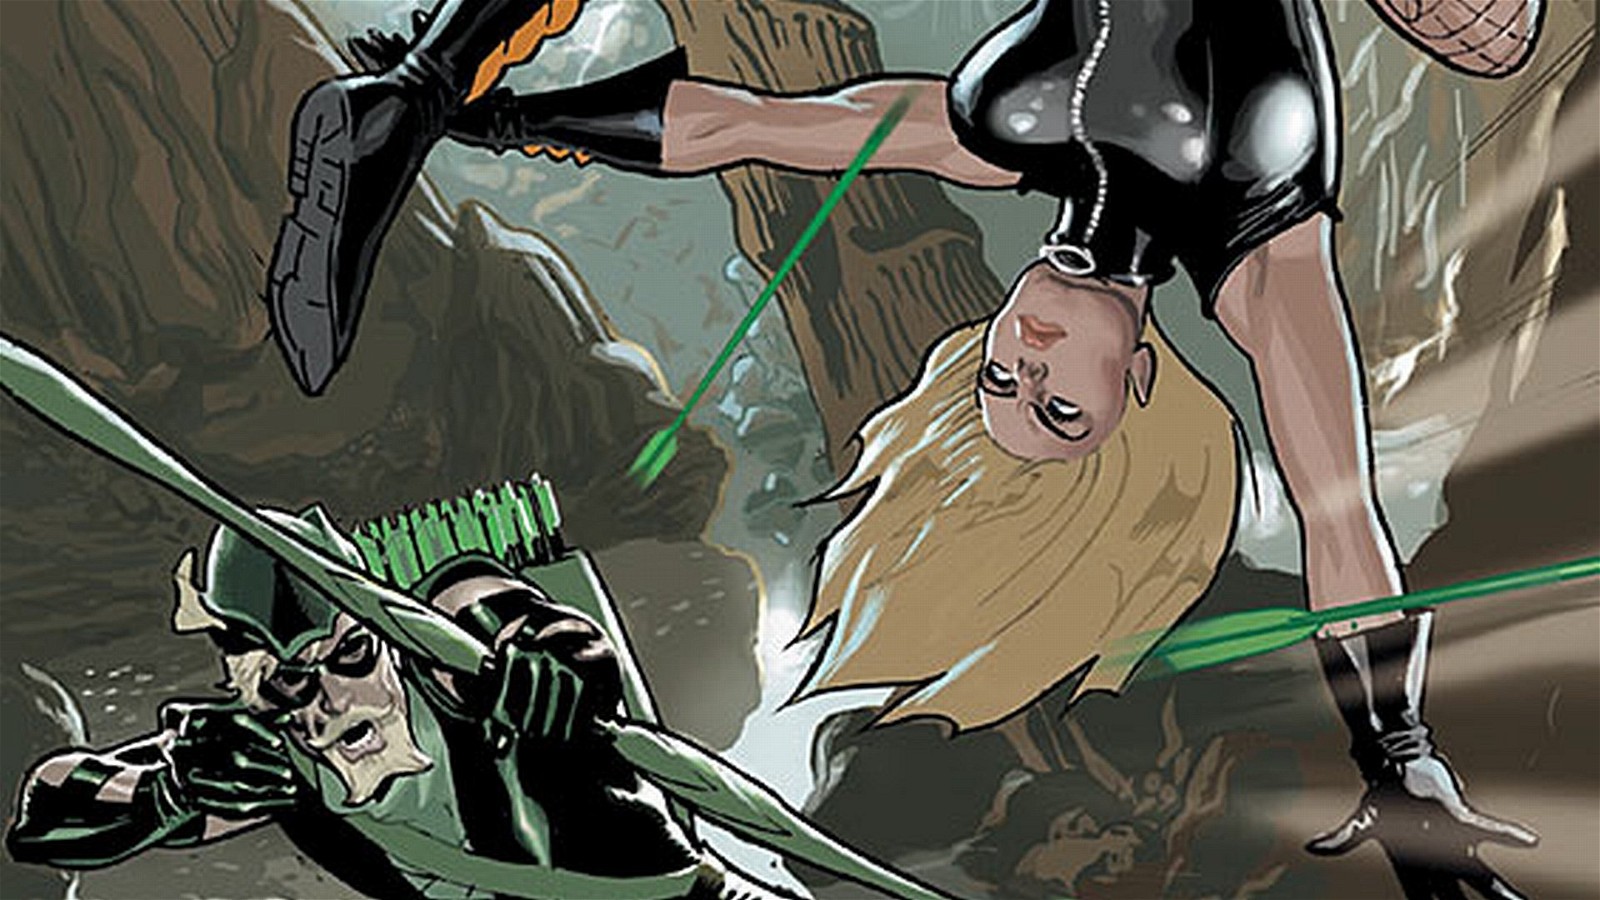 James Gunn is reportedly bringing DC Comics' Green Arrow and Black Canary to the big screen